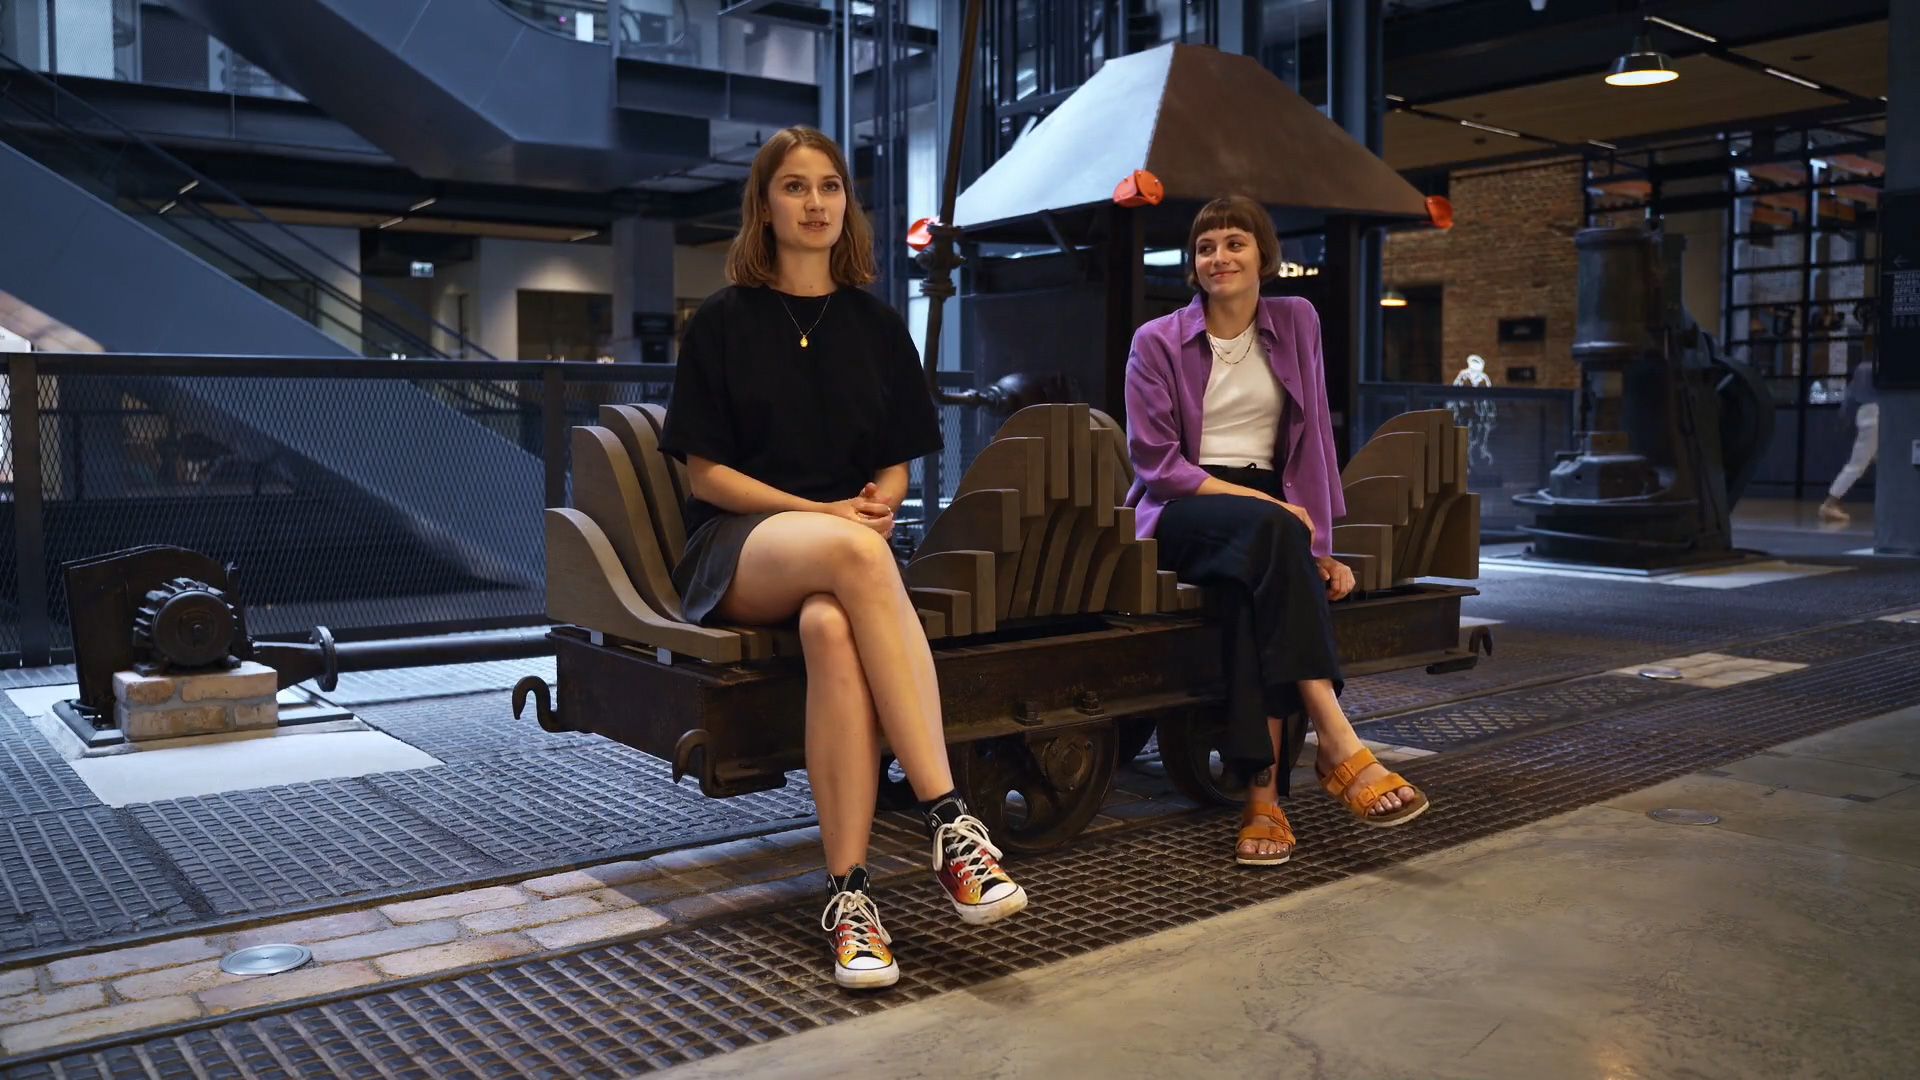 Klara Malinowska and Aleksandra Szawdzin, students of the School of Form, on the bench they designed at the Norblin Factory | Screenshot from a video produced by Mediafresh for the Norblin Factory